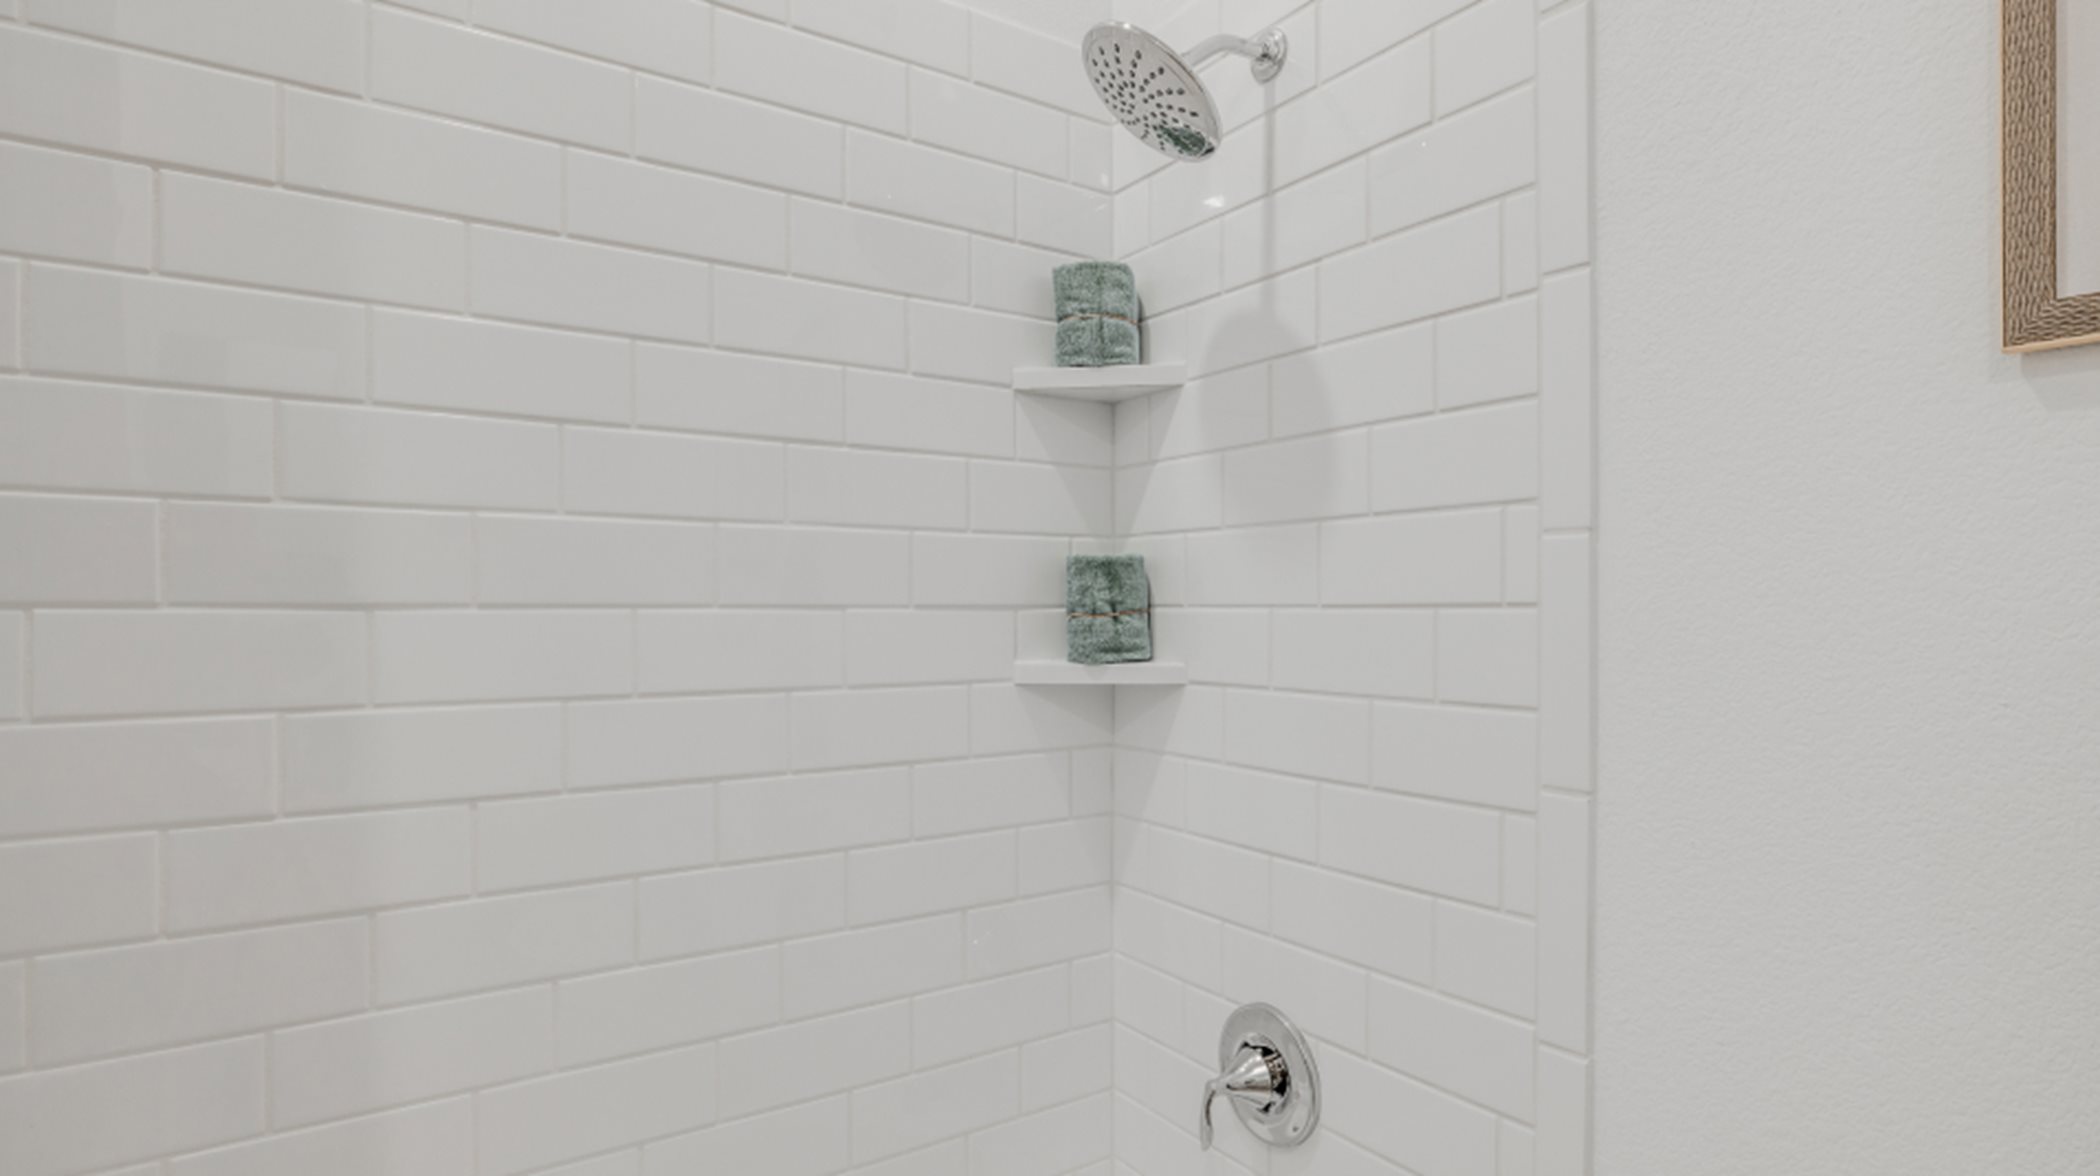 Kimball subway tile surround in the shower 